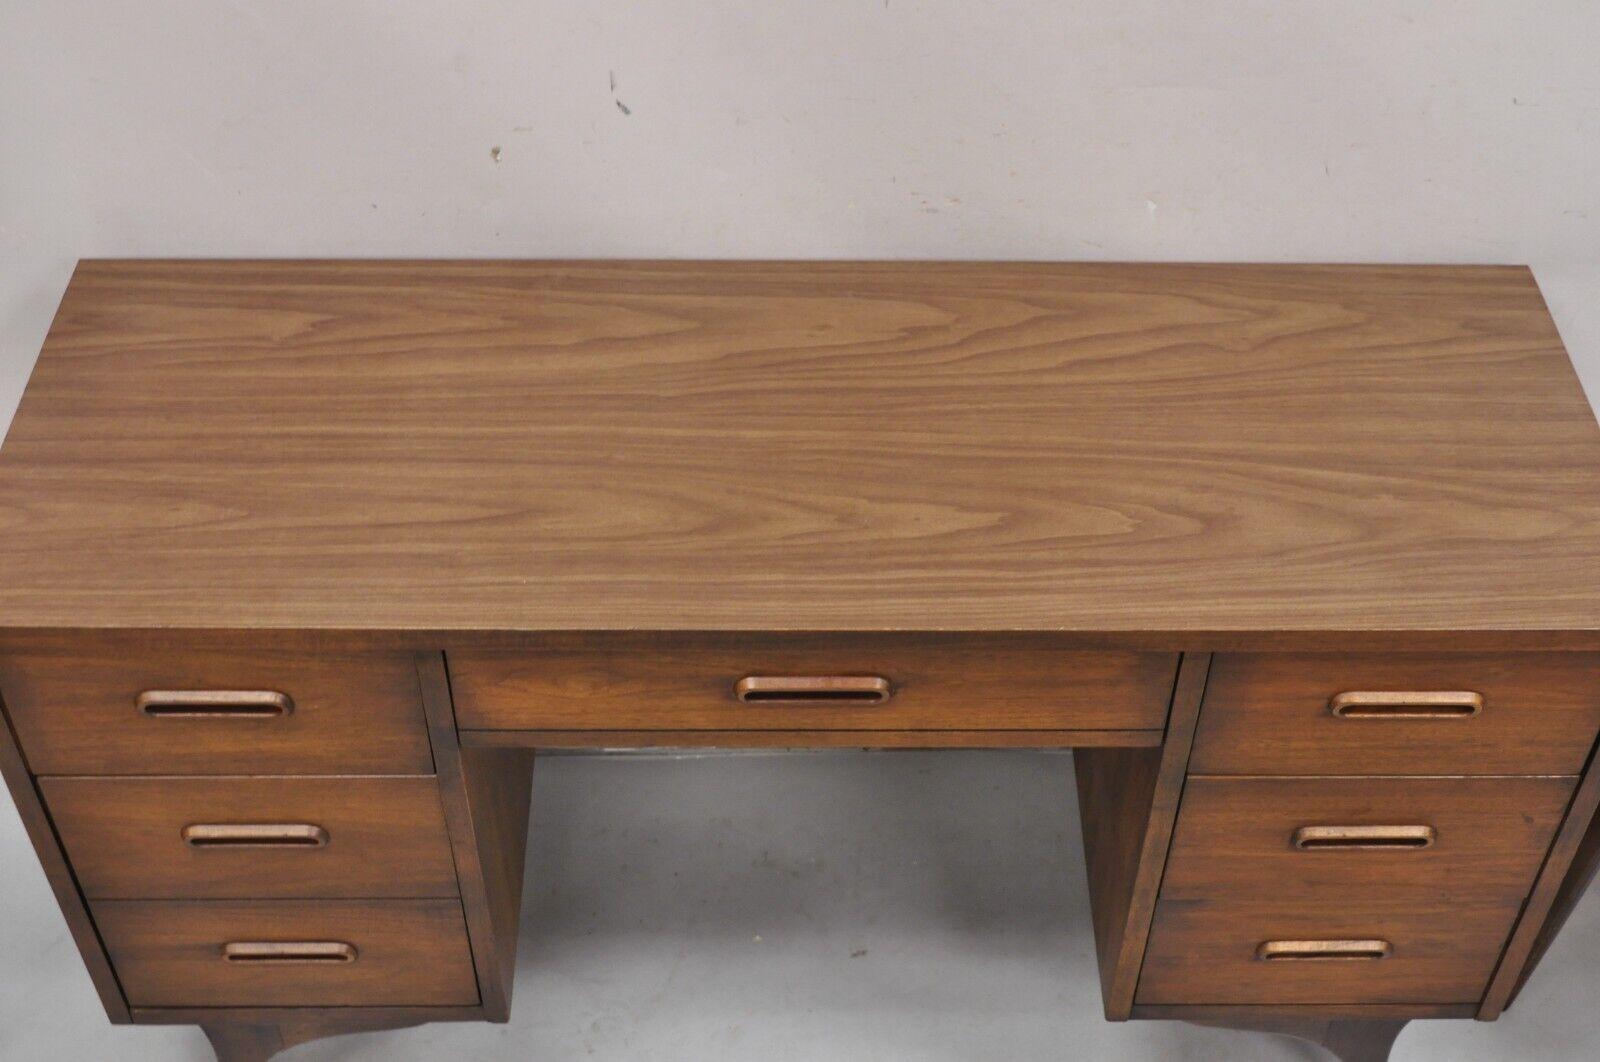 Vintage Mid Century Modern Walnut Sculpted Legs Kneehole Desk & Chair - 2 Pc Set In Good Condition For Sale In Philadelphia, PA